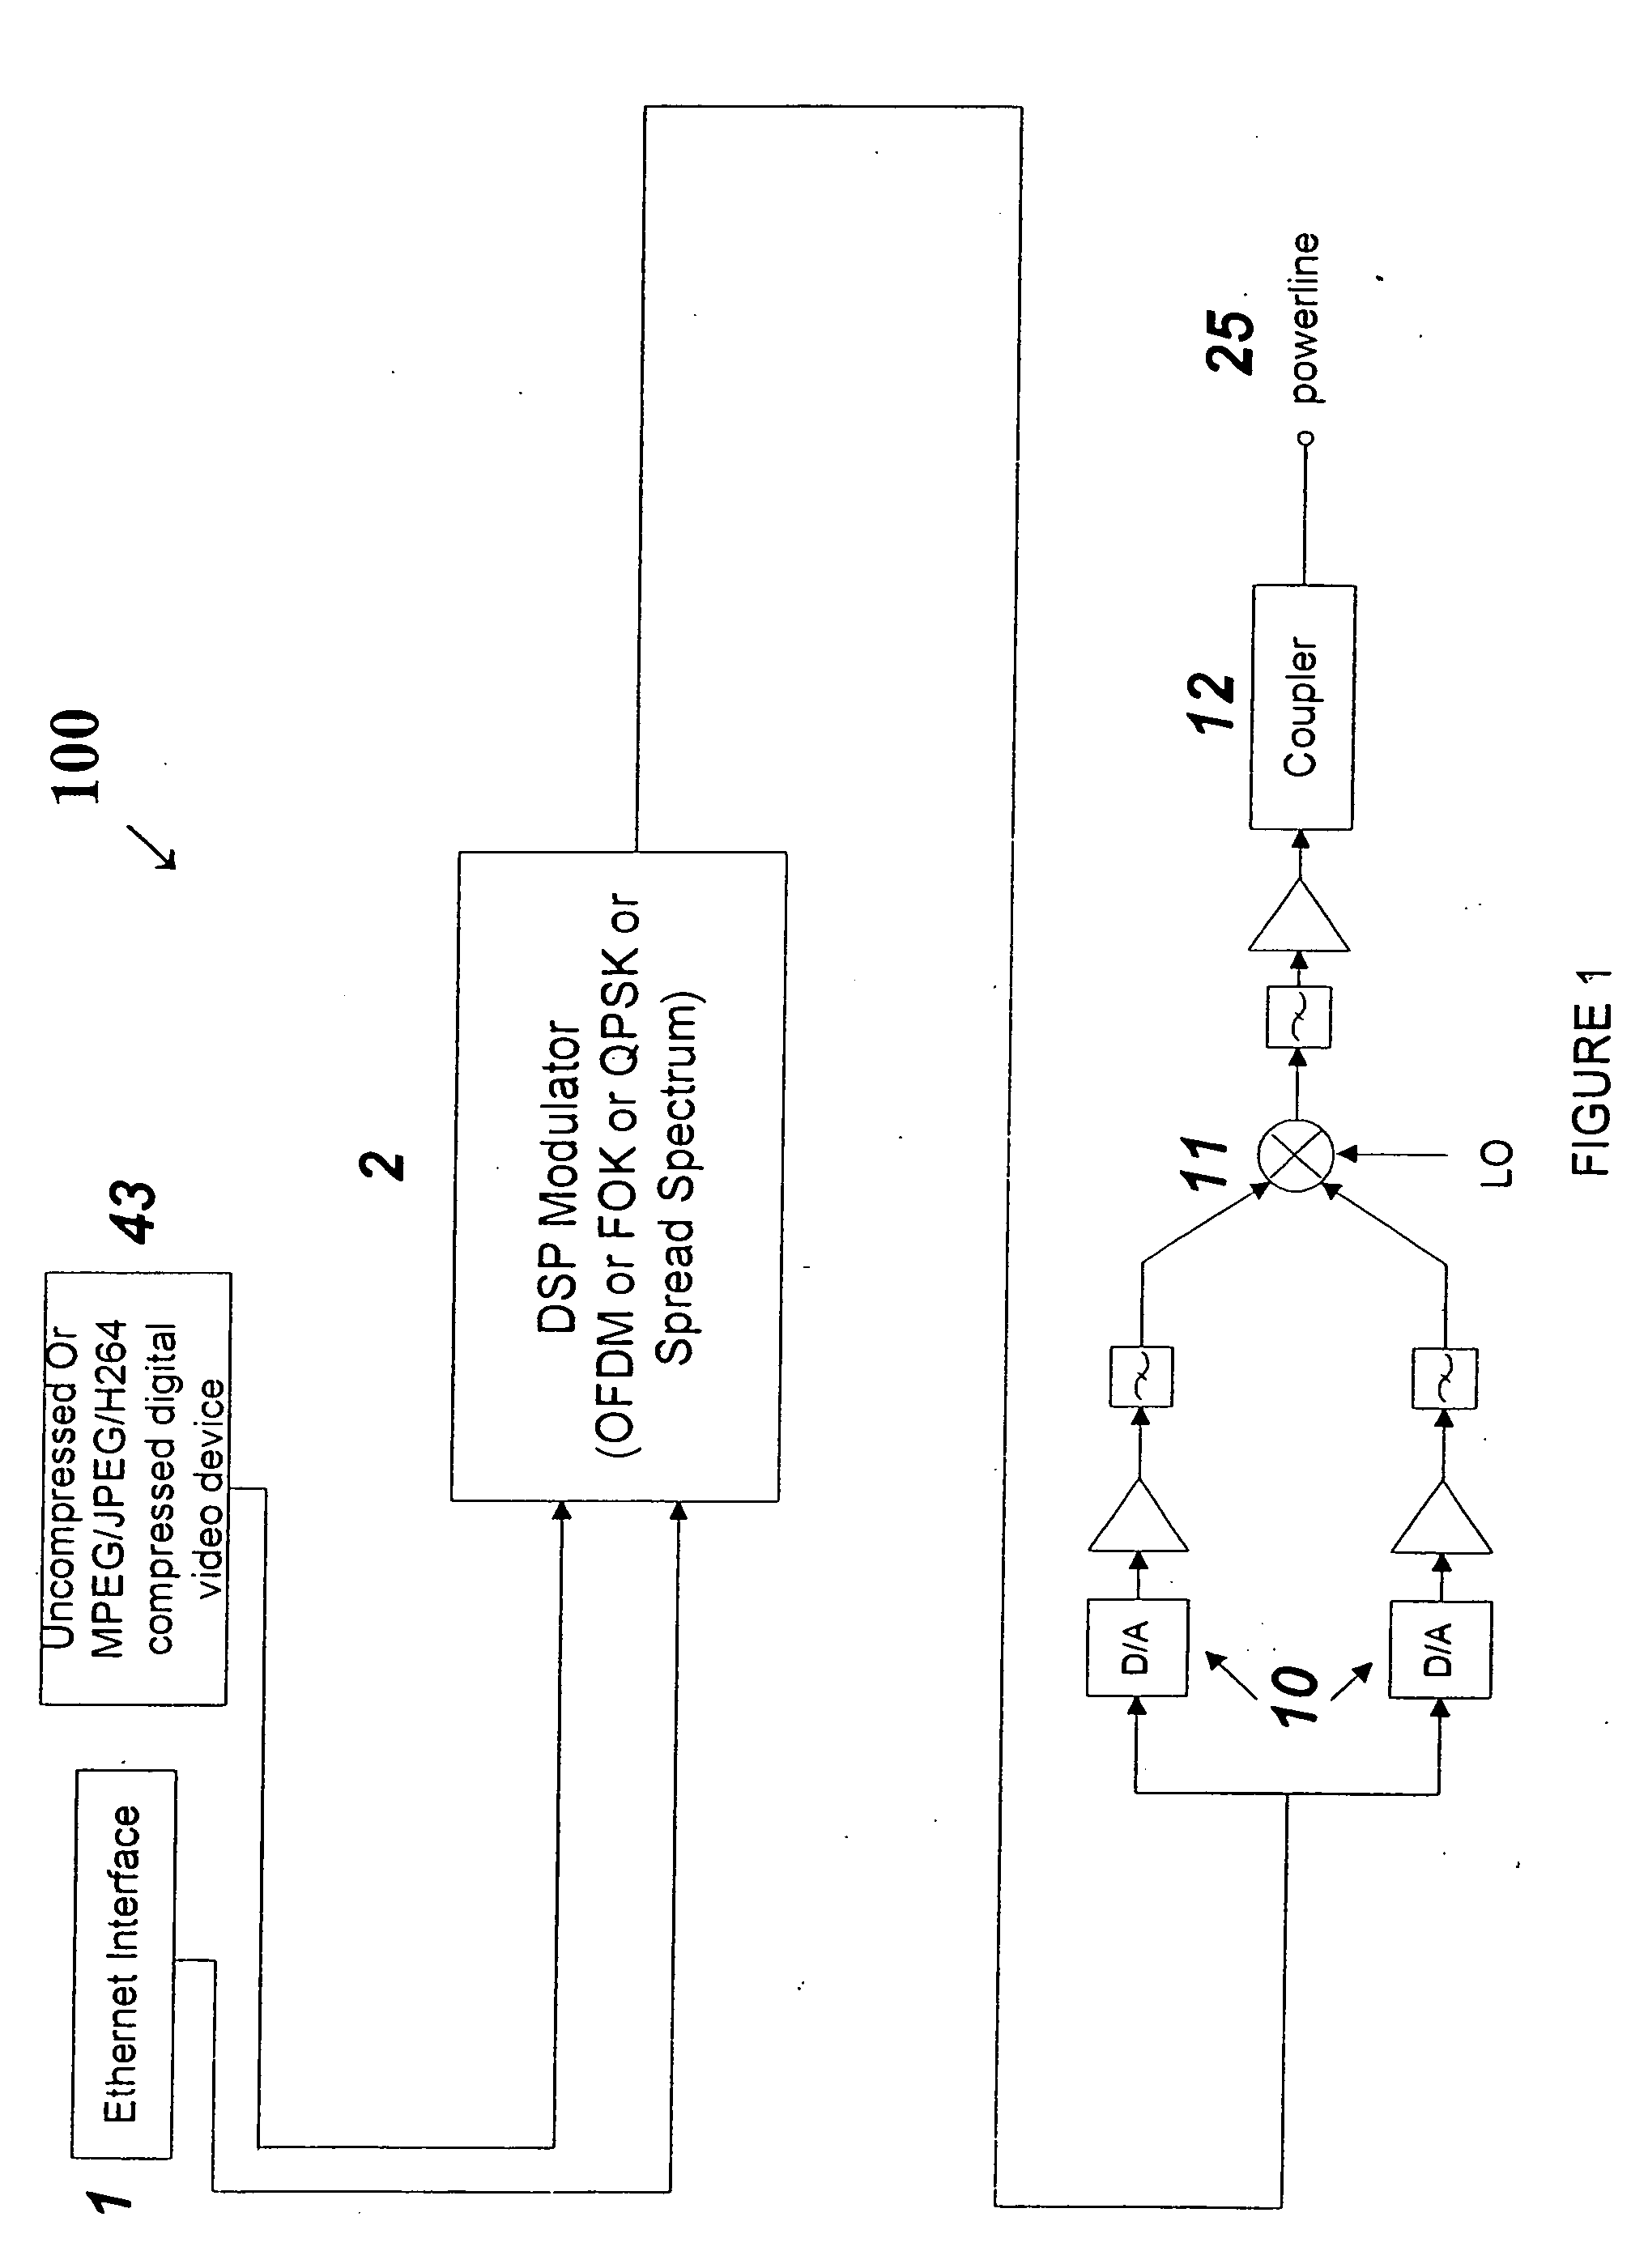 Apparatus and method for transmitting digital data over various communication media